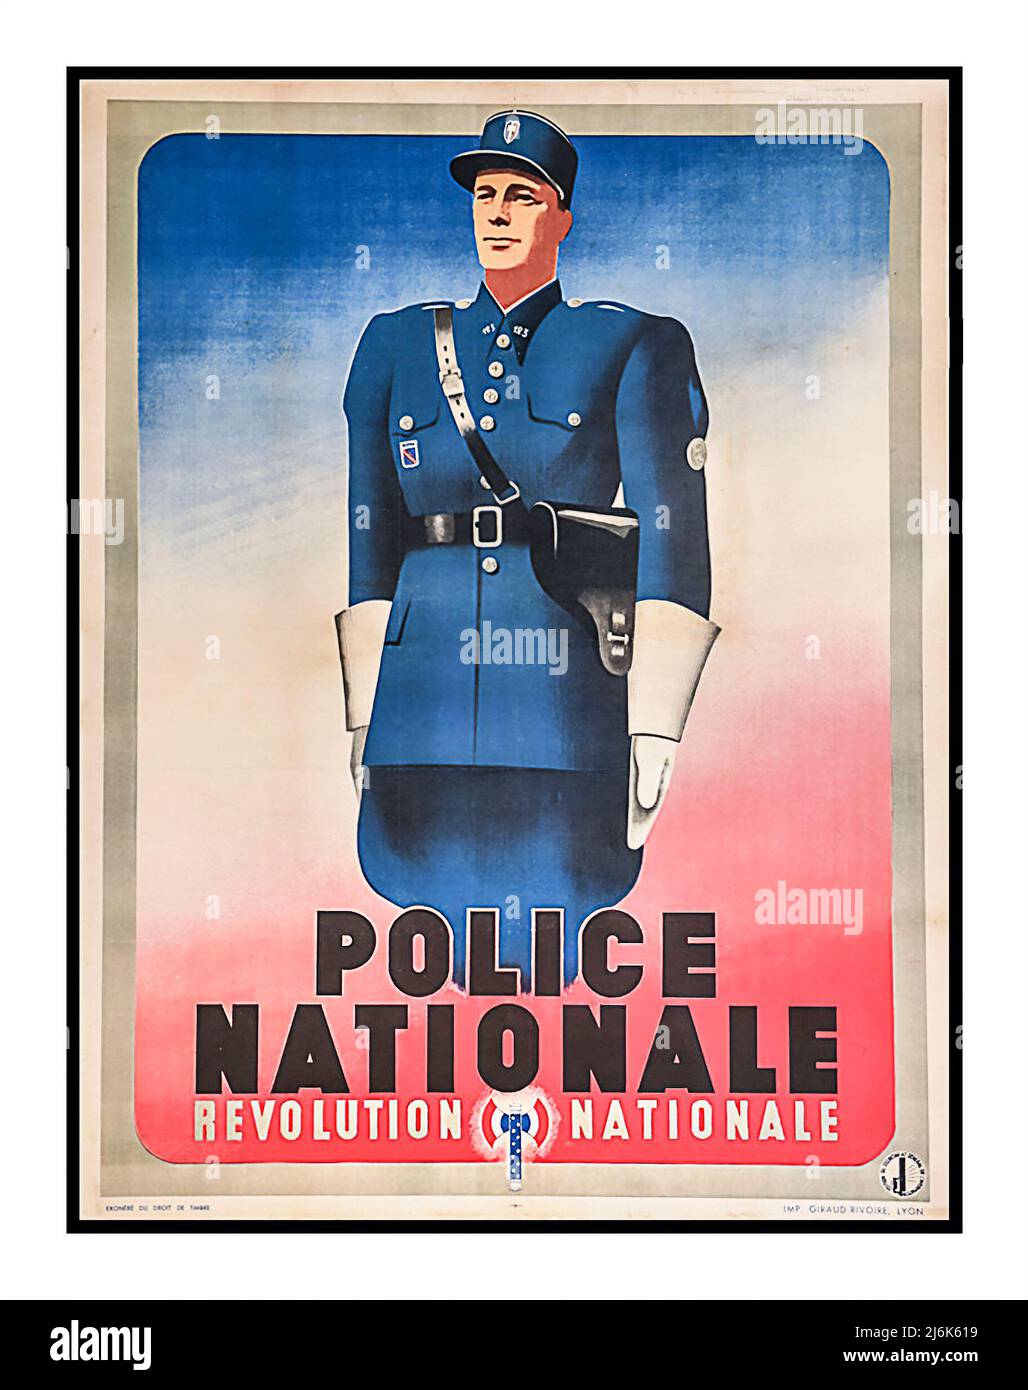 Vintage Vichy France WW2 Poster National Police National Revolution”: propaganda poster for the recruitment of the National Police within the framework of the National Revolution of the Vichy regime, Edition of the General Secretariat of Information, Giraud-Rivoire printing works in Lyon, end of 1941 - beginning of 1942  (Police nationale Révolution nationale » : affiche de propagande pour le recrutement de la Police nationale dans le cadre de la Révolution nationale du régime de Vichy, Édition du Secrétariat Général de l’Information, imprimerie Giraud-Rivoire à Lyon, fin 1941 - début 1942) Stock Photo